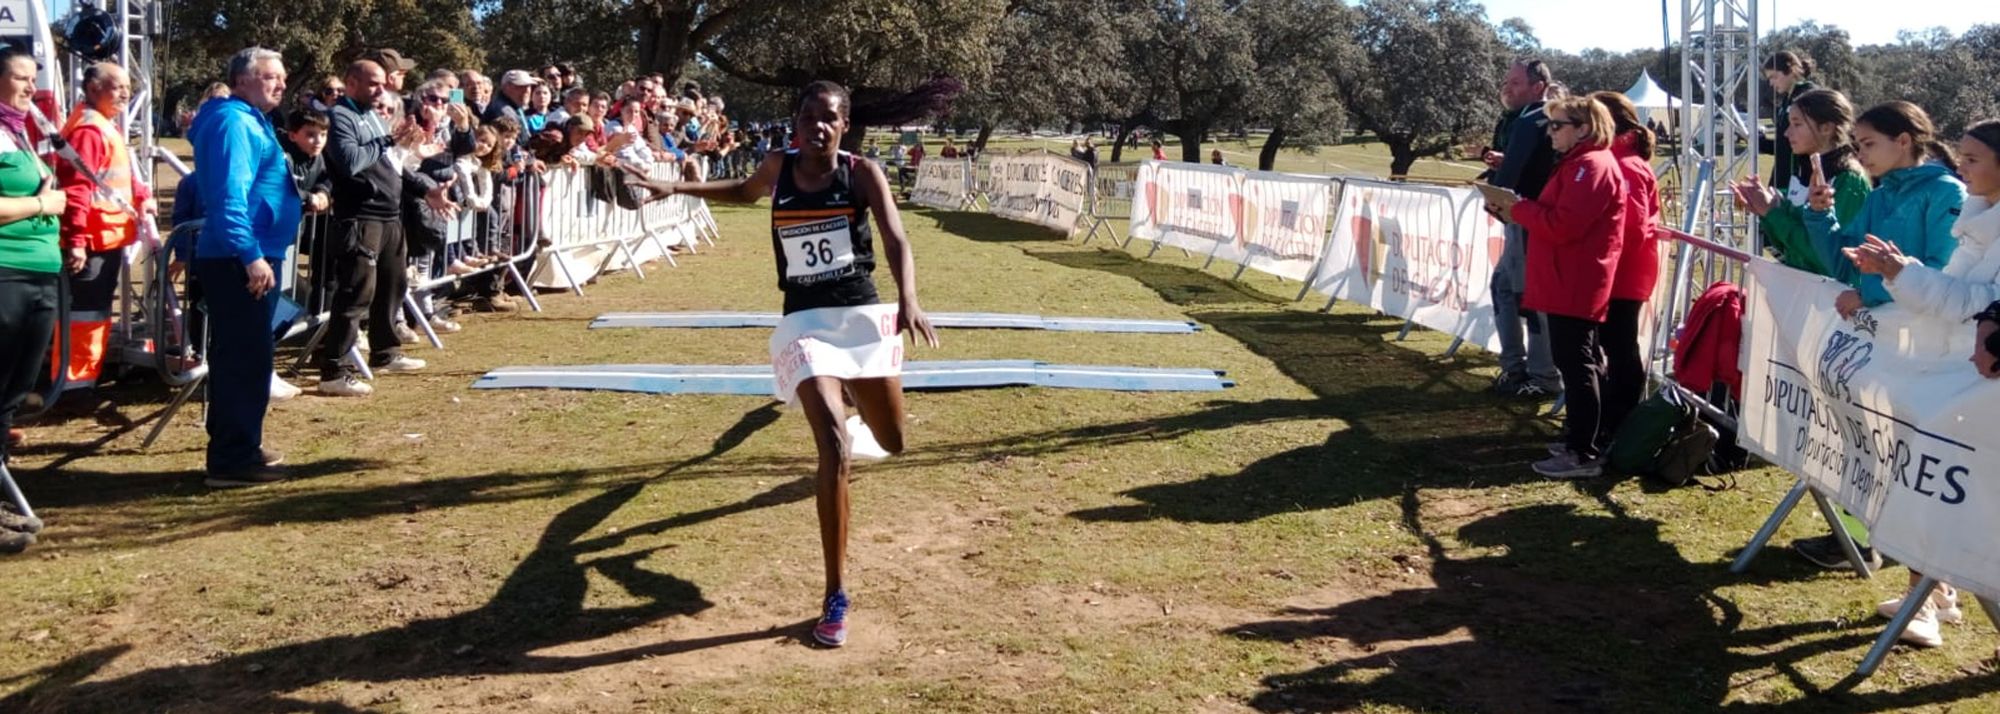 France's Yann Schrub and Kenya's Nancy Chepleting were comfortable winners at the Gran Premio Cáceres Campo a Traves